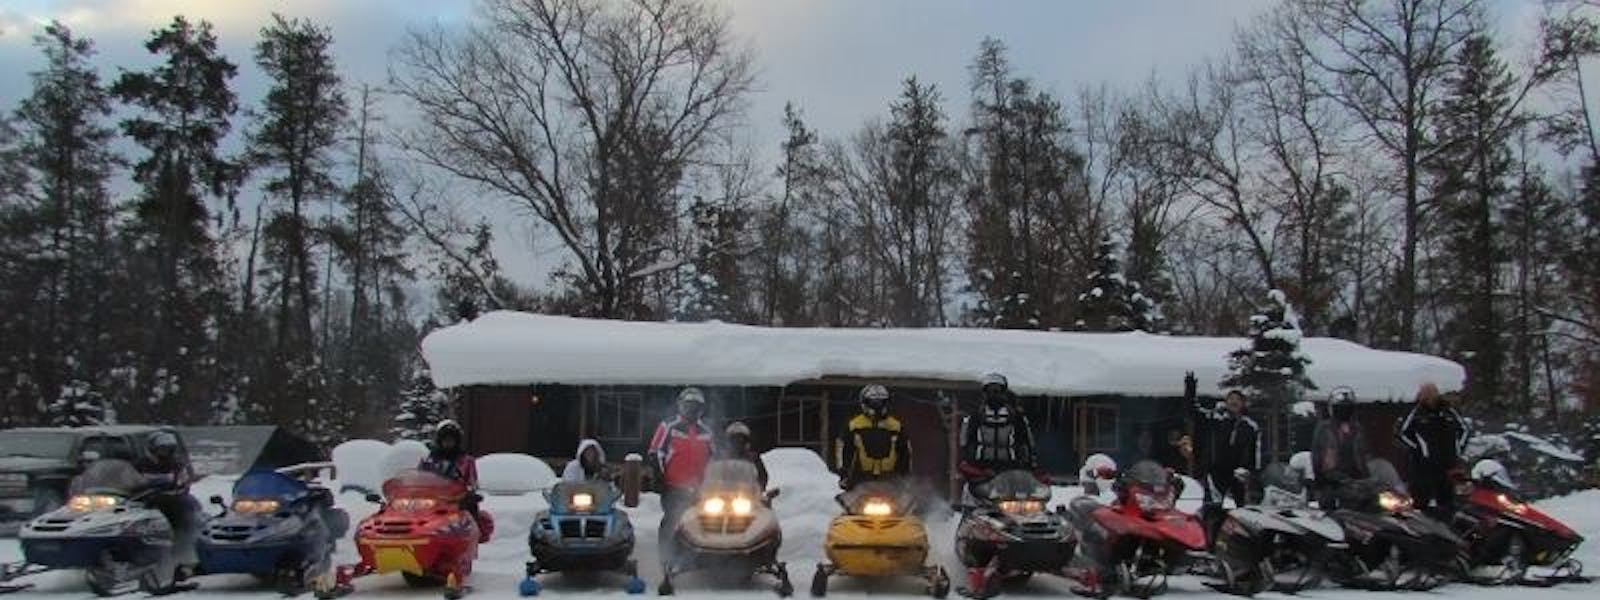 Direct Snowmobile Trail access at Best Bear Lodge & Campground.